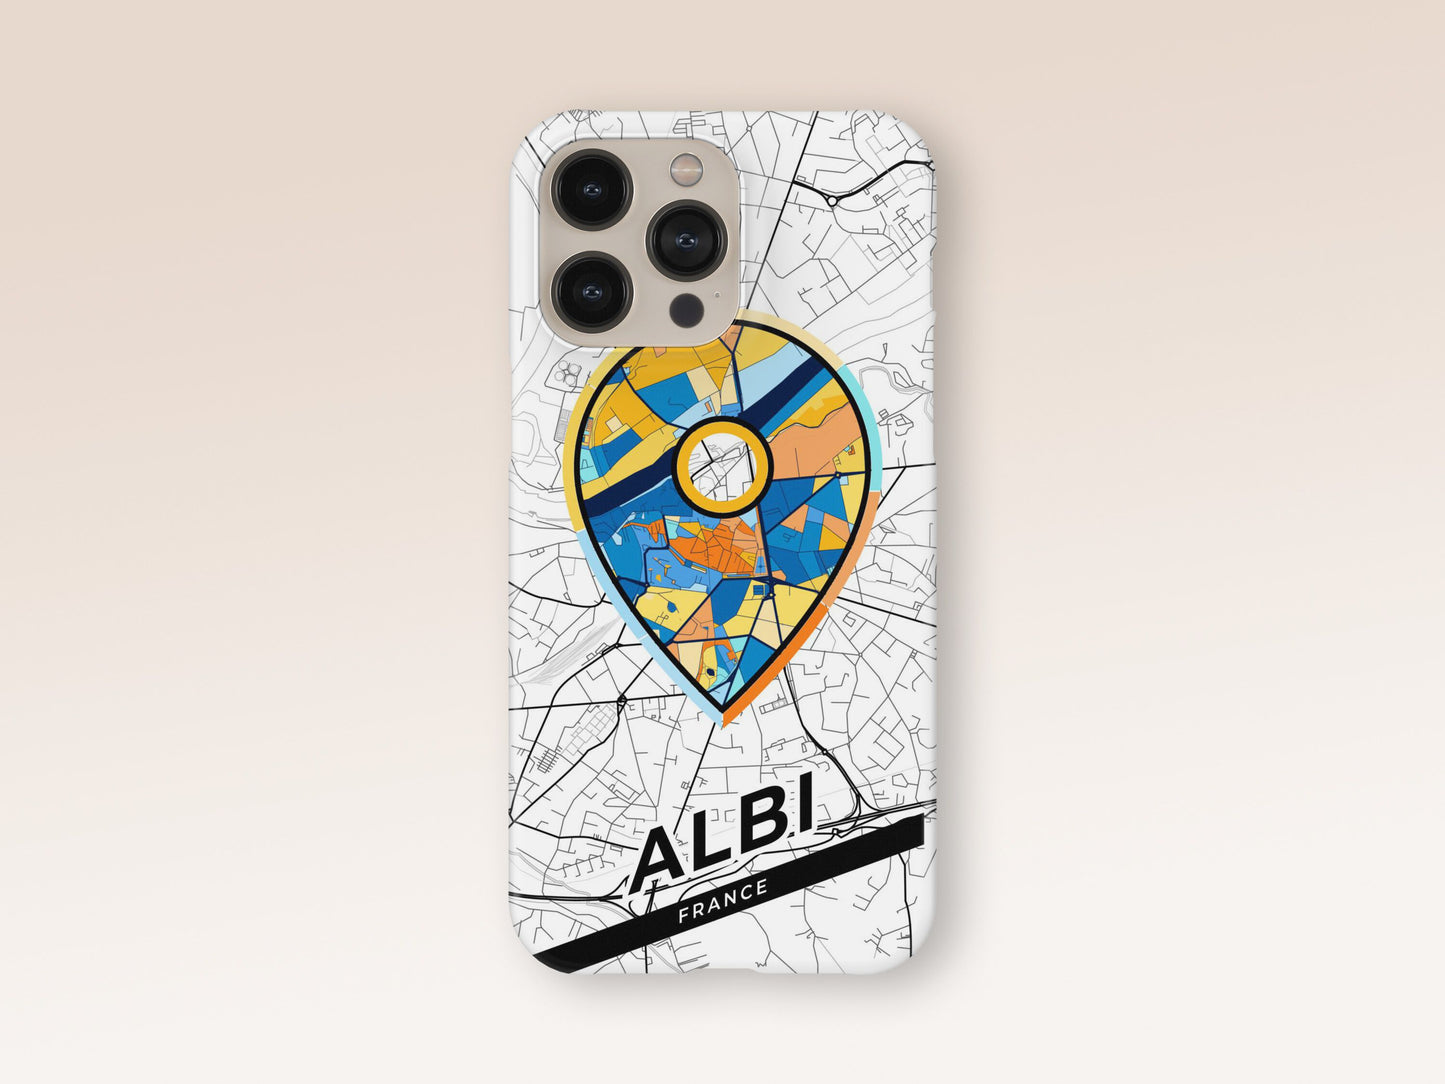 Albi France slim phone case with colorful icon. Birthday, wedding or housewarming gift. Couple match cases. 1